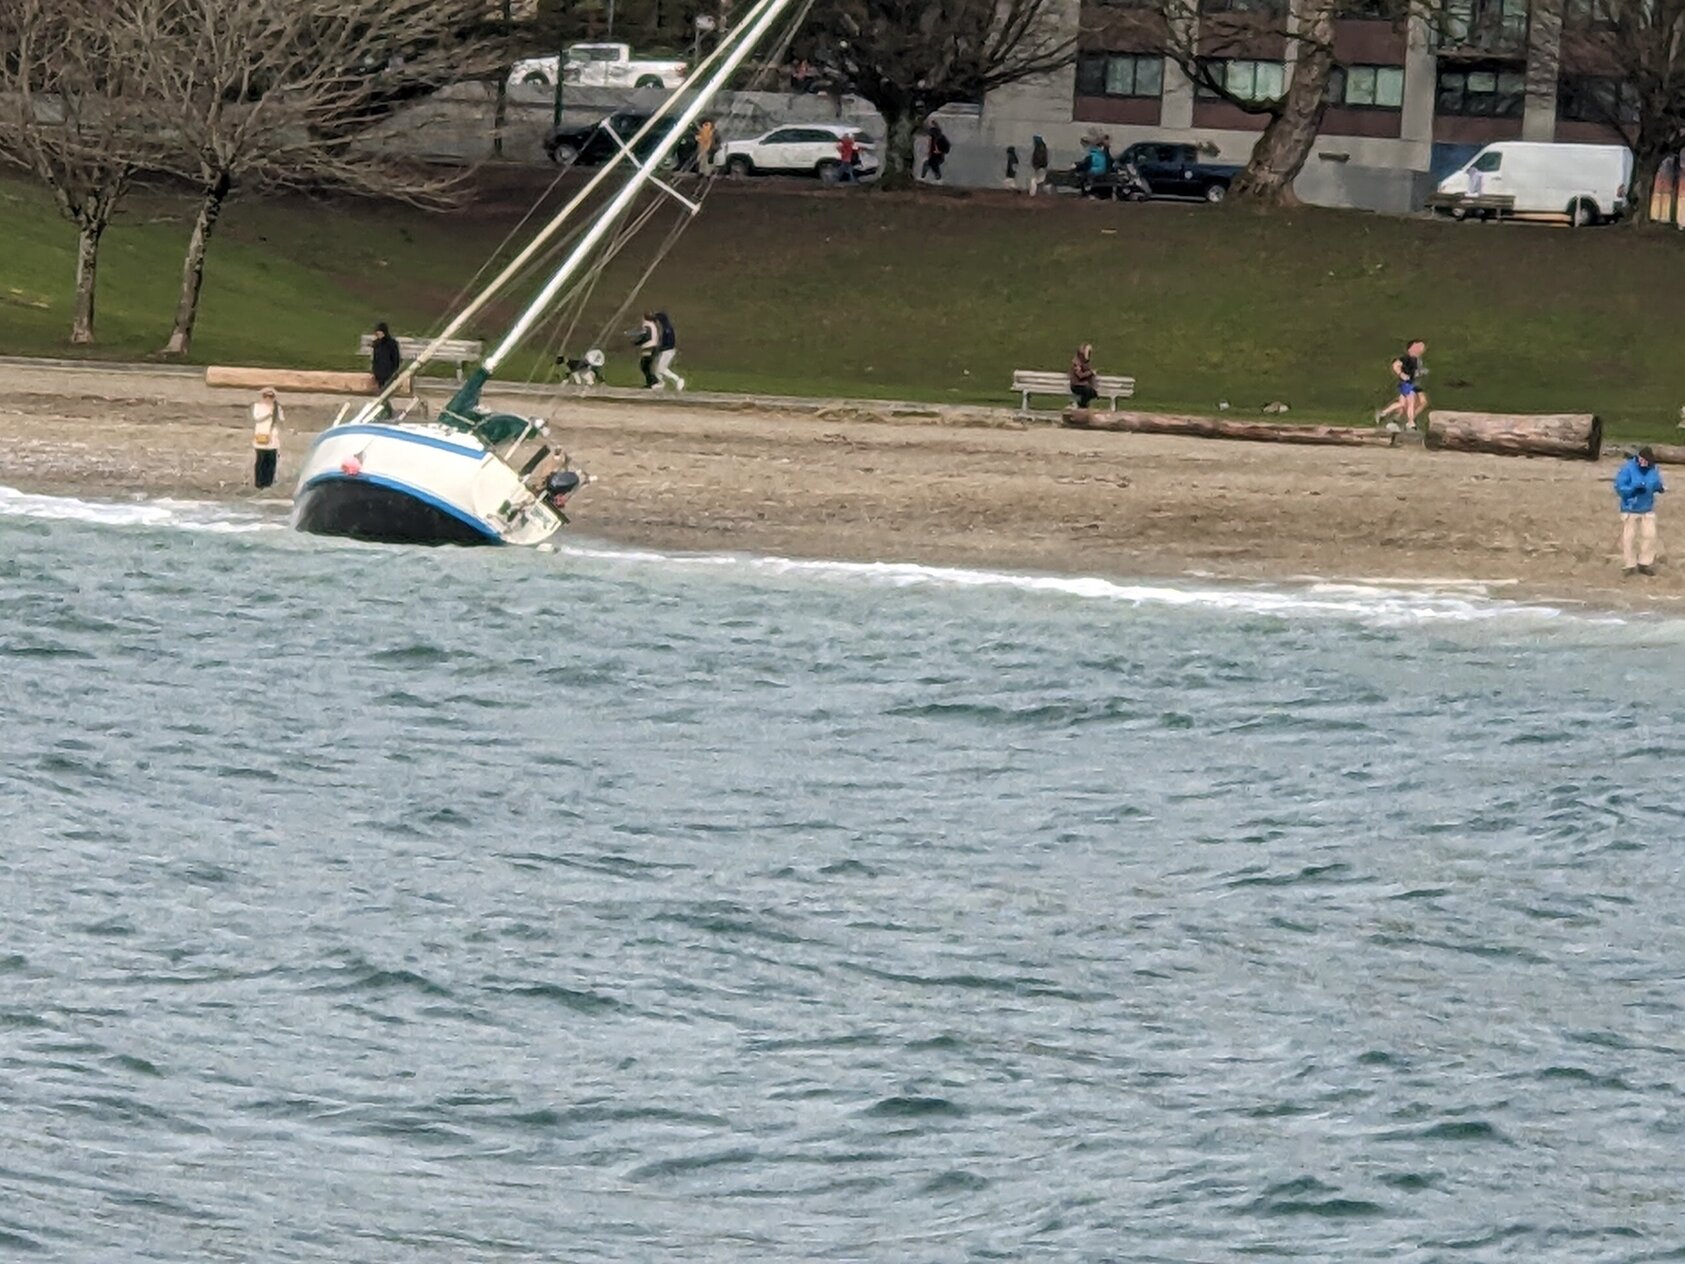 A white sailboat with blue trim lies at a 45° angle on a beach, its hull half-submerged in the waves.